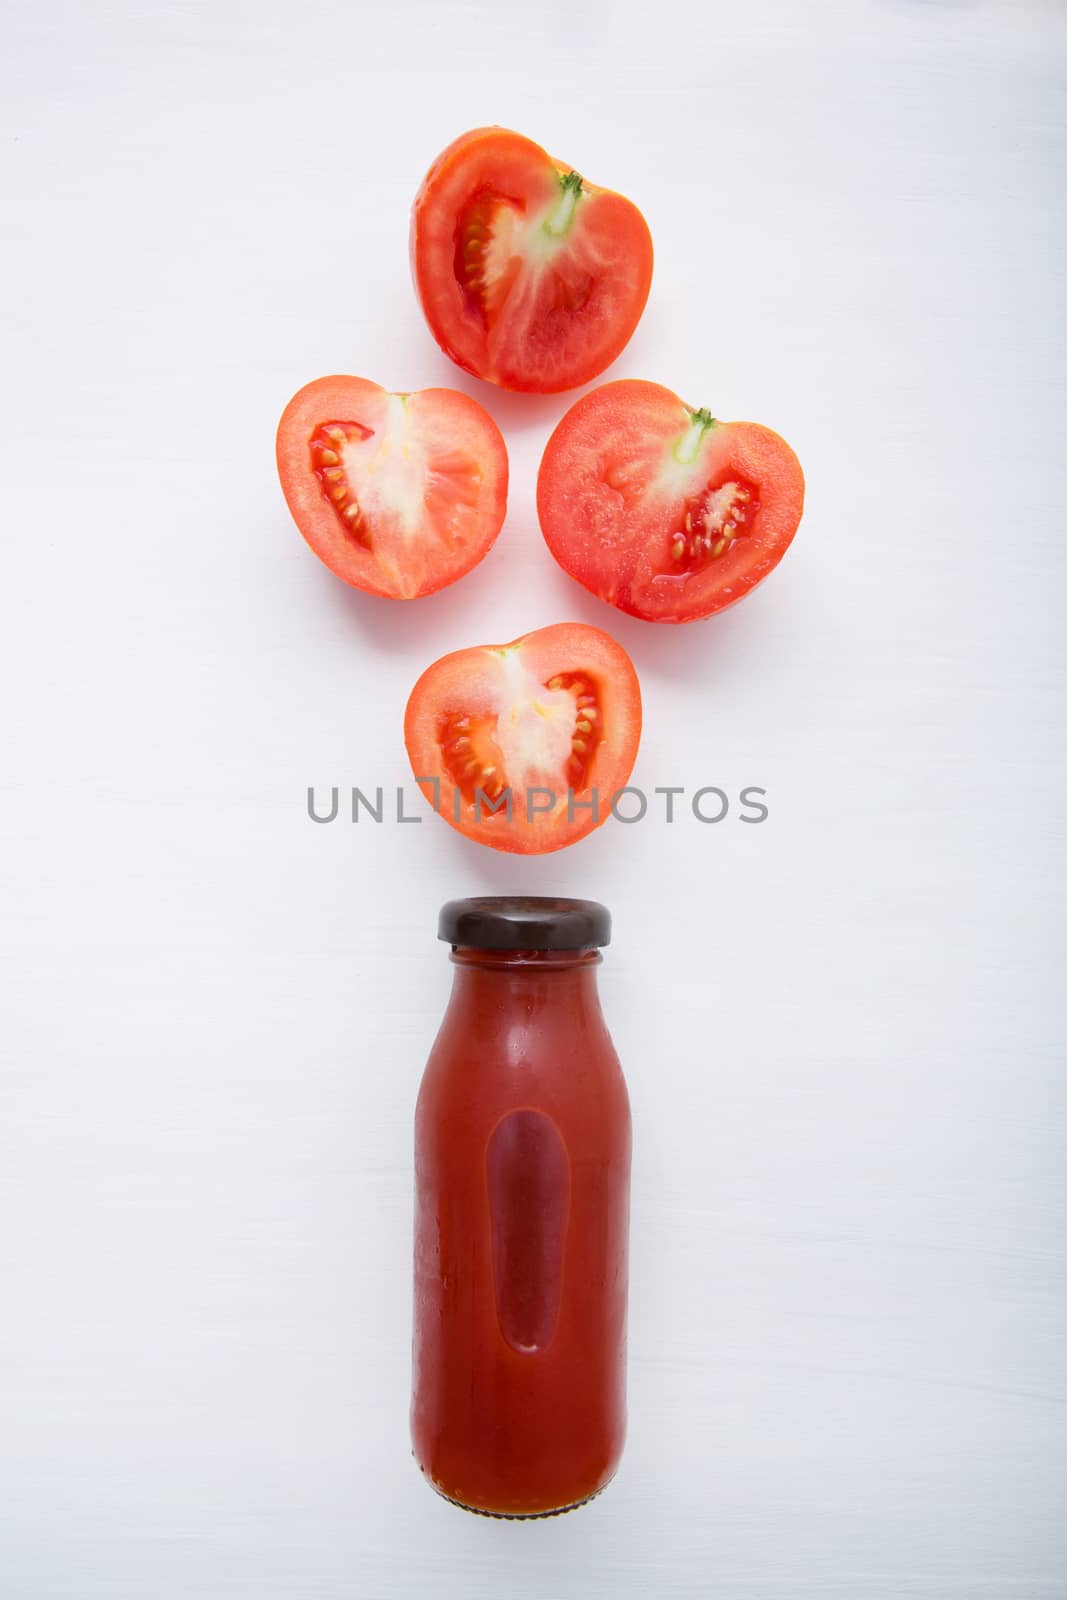 Tomatoes juice in bottle and fresh tomatoes slices on white wooden background.